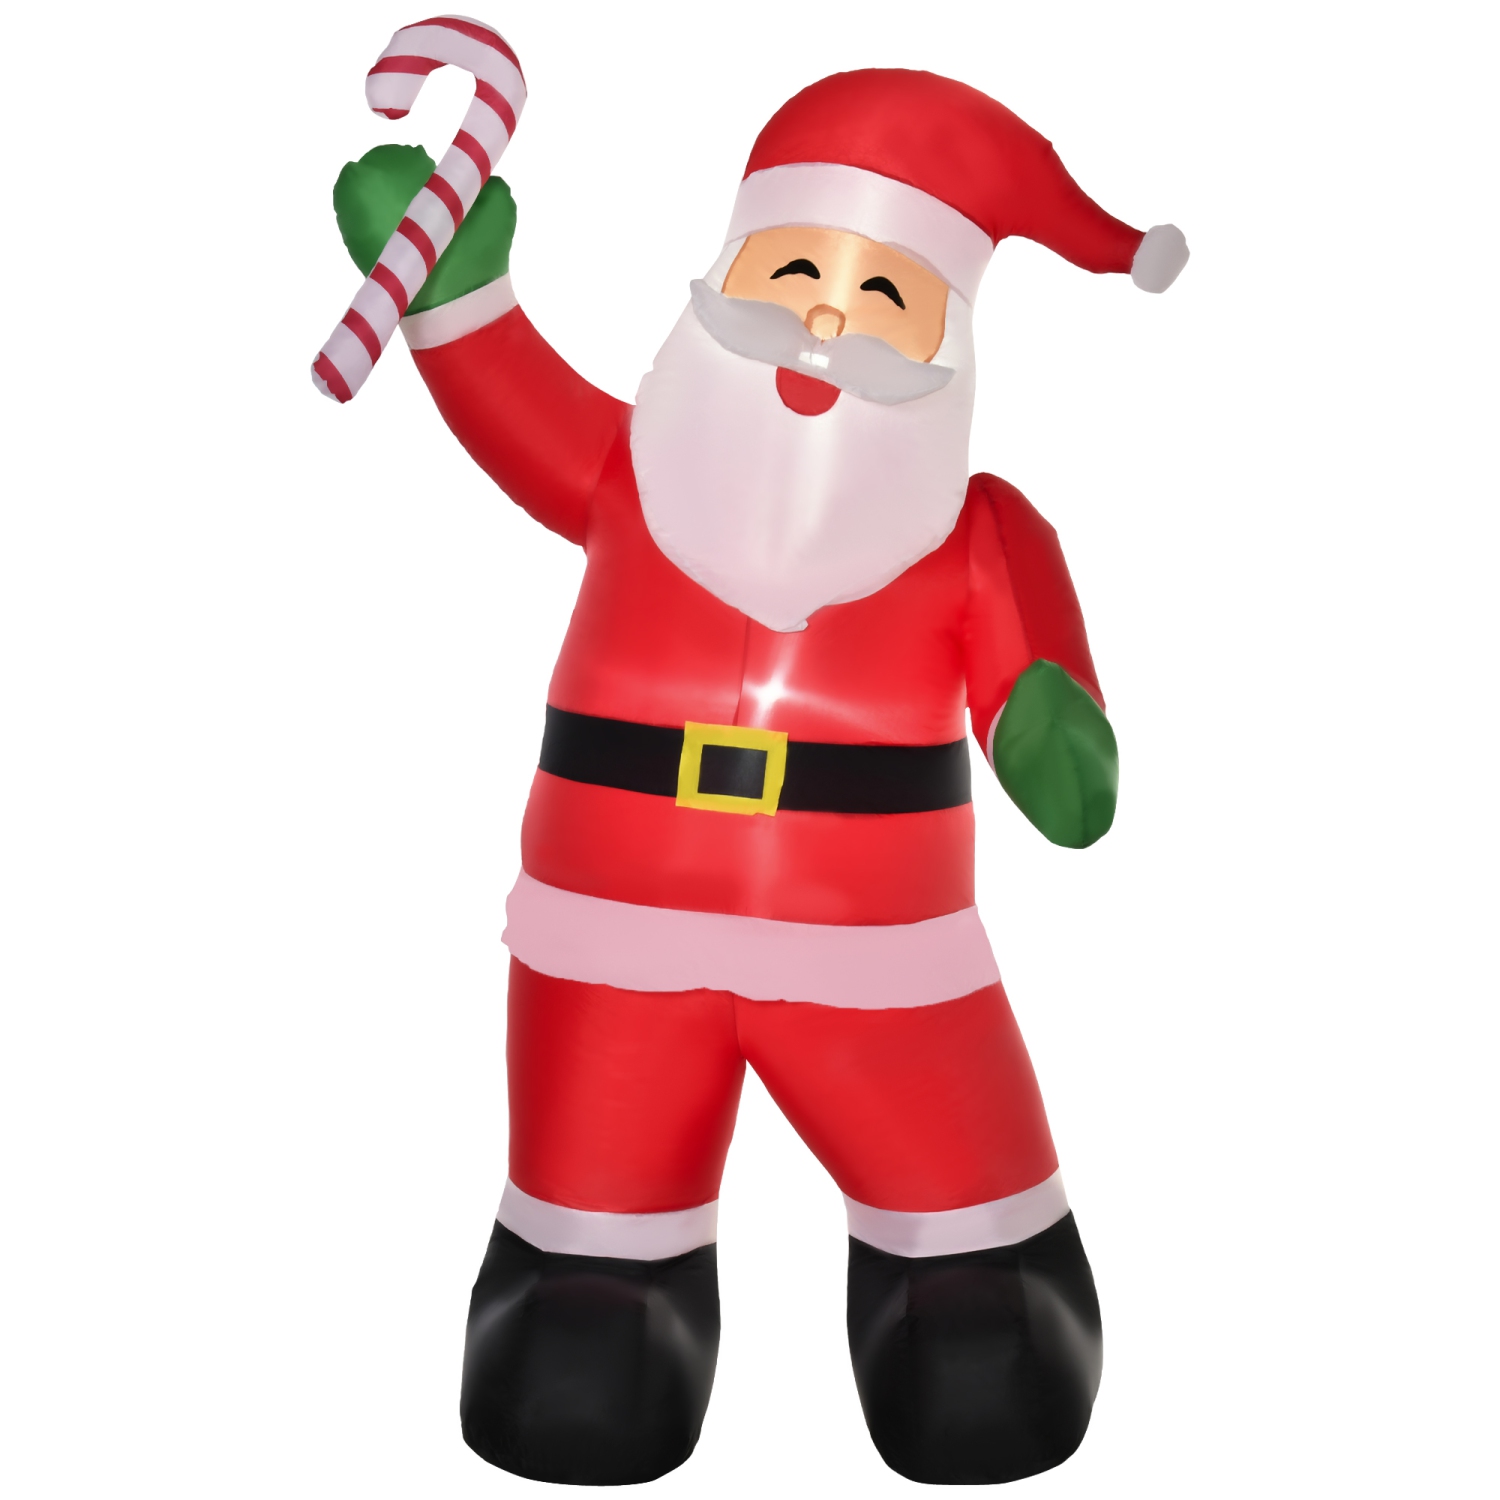 HOMCOM 8ft Inflatable Christmas Smiling Santa Claus with Candy Cane, Blow-Up Outdoor LED Yard Display for Lawn Garden Party